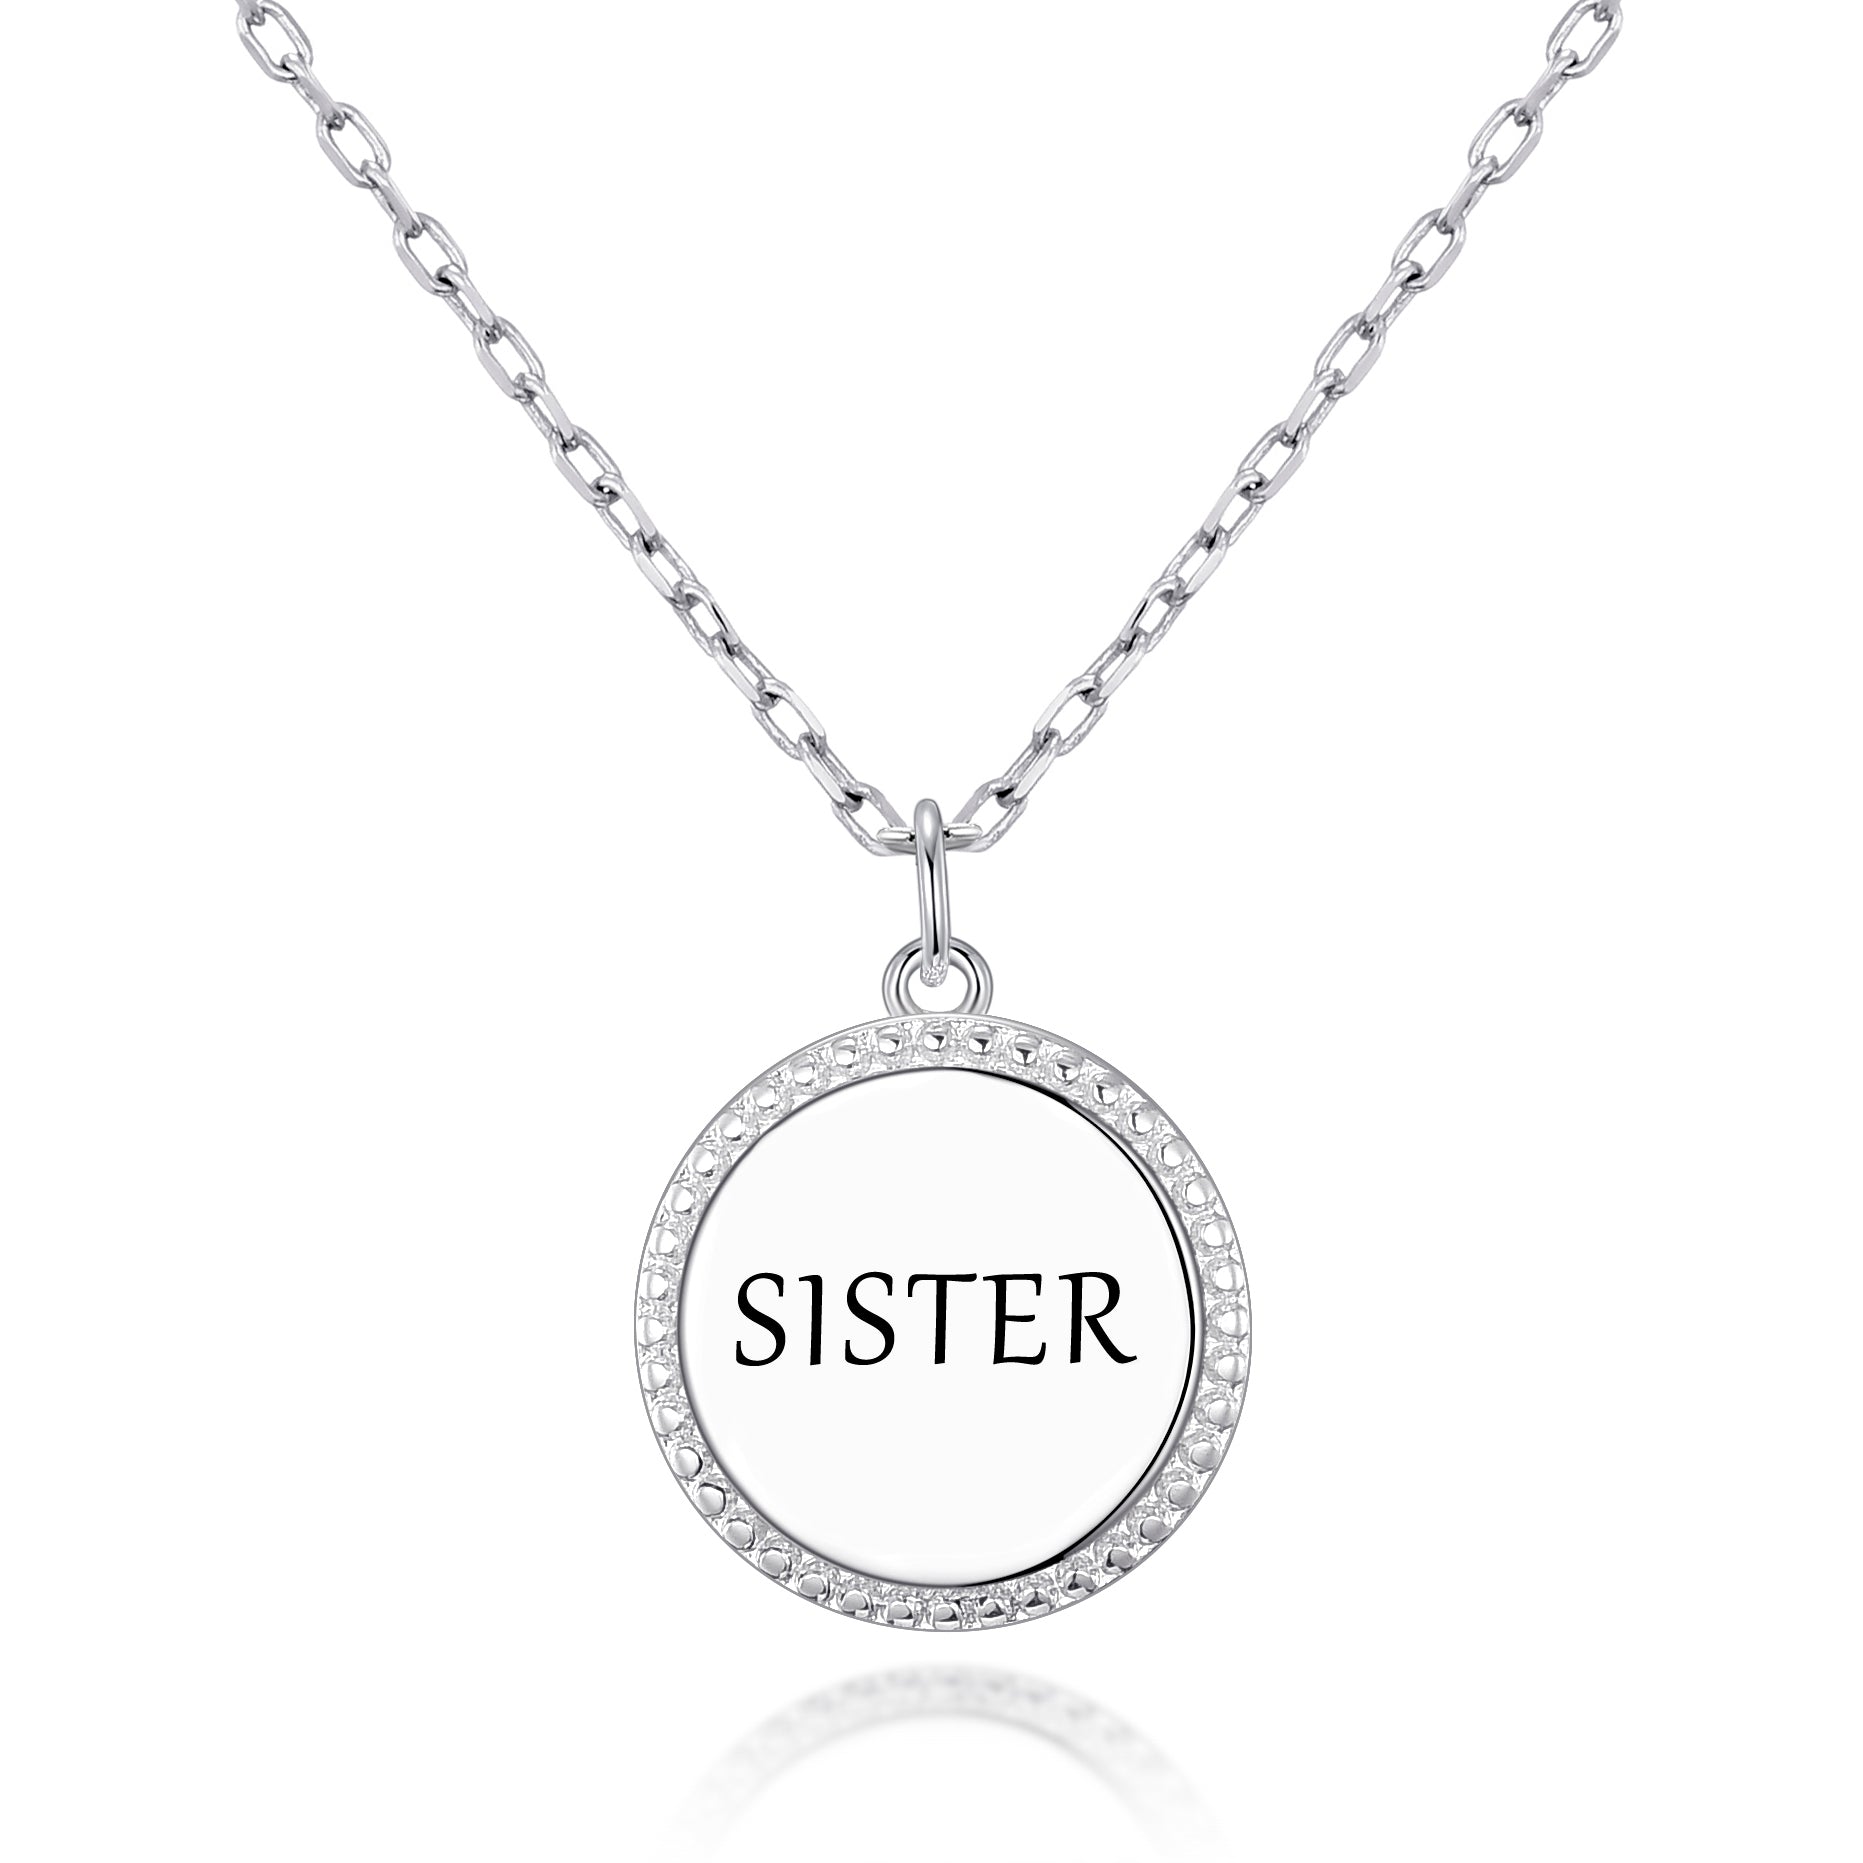 Silver Plated Filigree Disc Sister Necklace